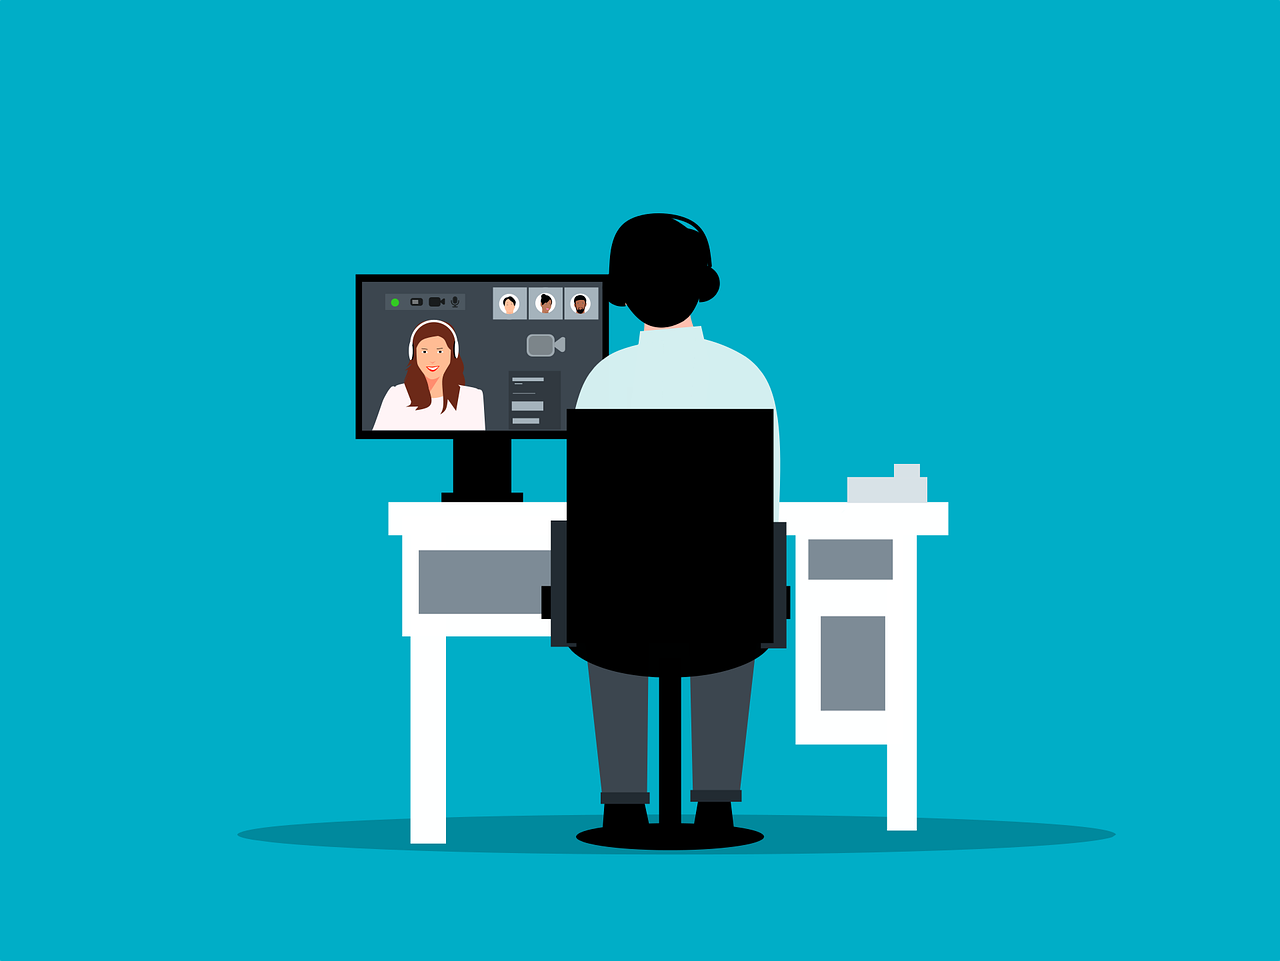 Cartoon image of a person sitting at a desk looking at a computer